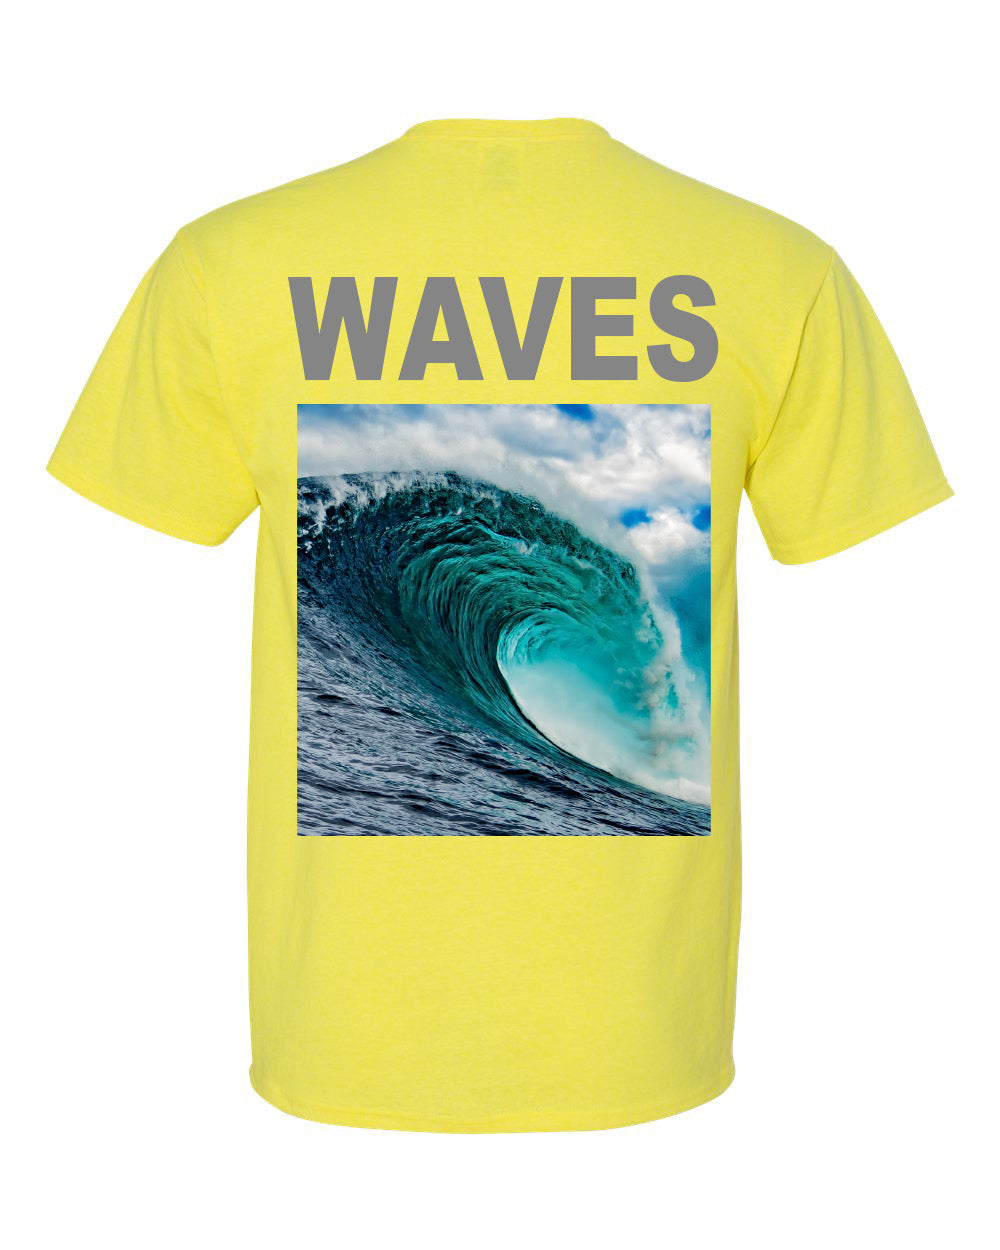 RIDE THE WAVE T-SHIRT 3M - NEON YELLOW